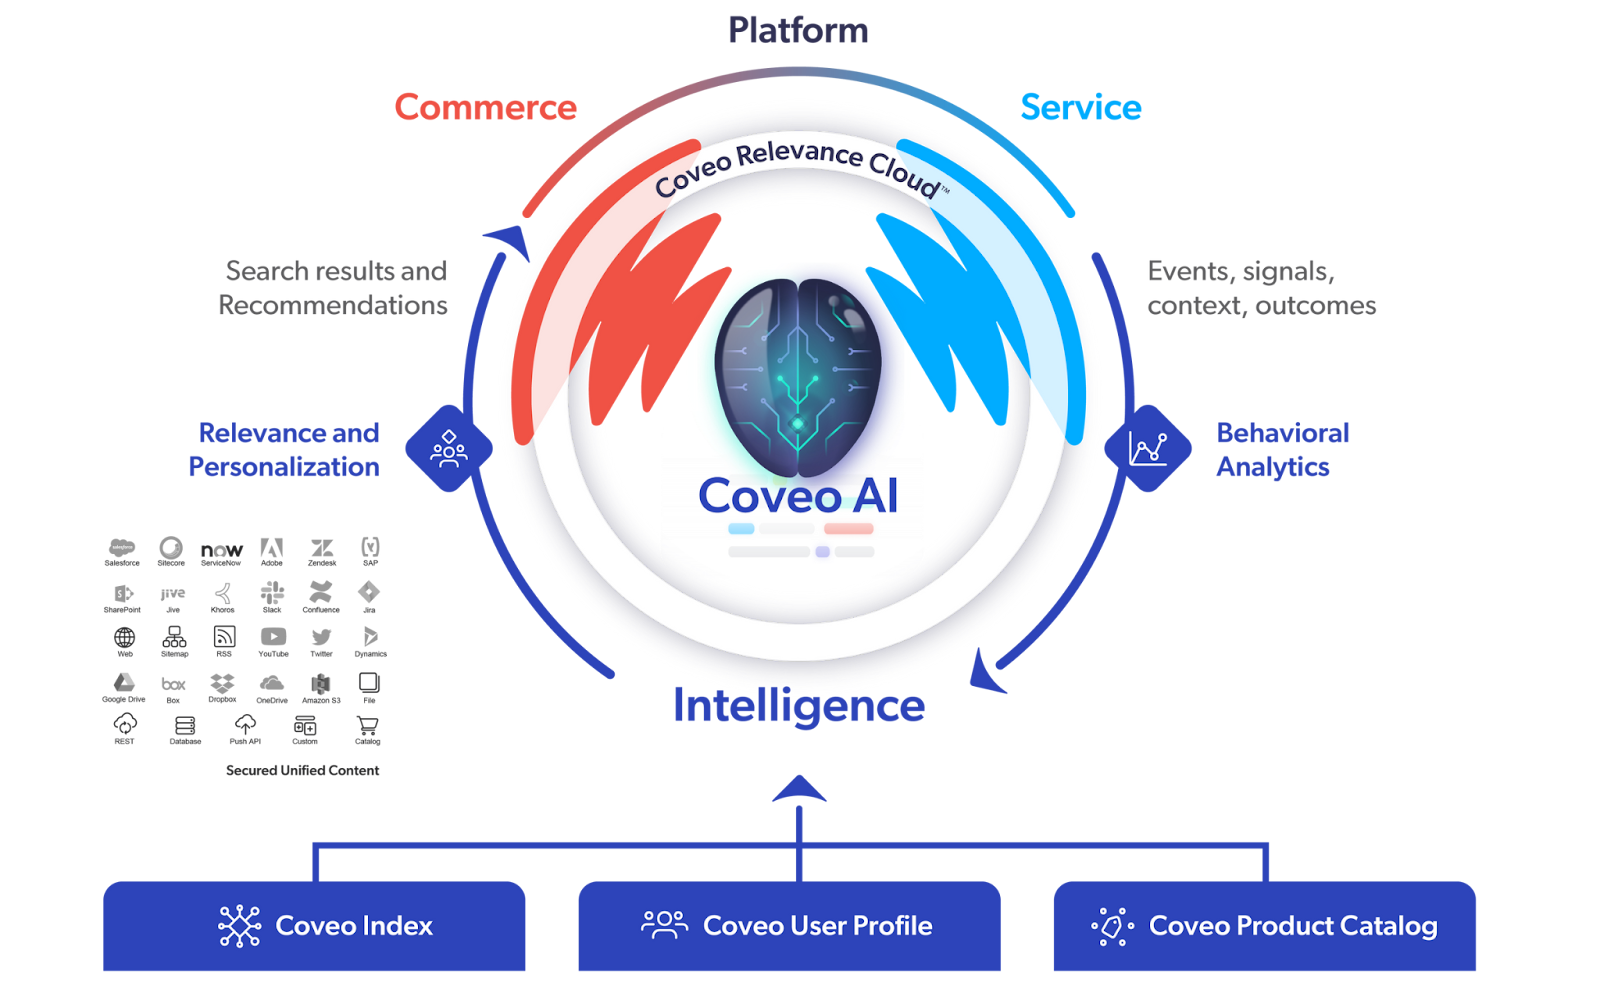 A graphic visualizes the Coveo Relevance Cloud.